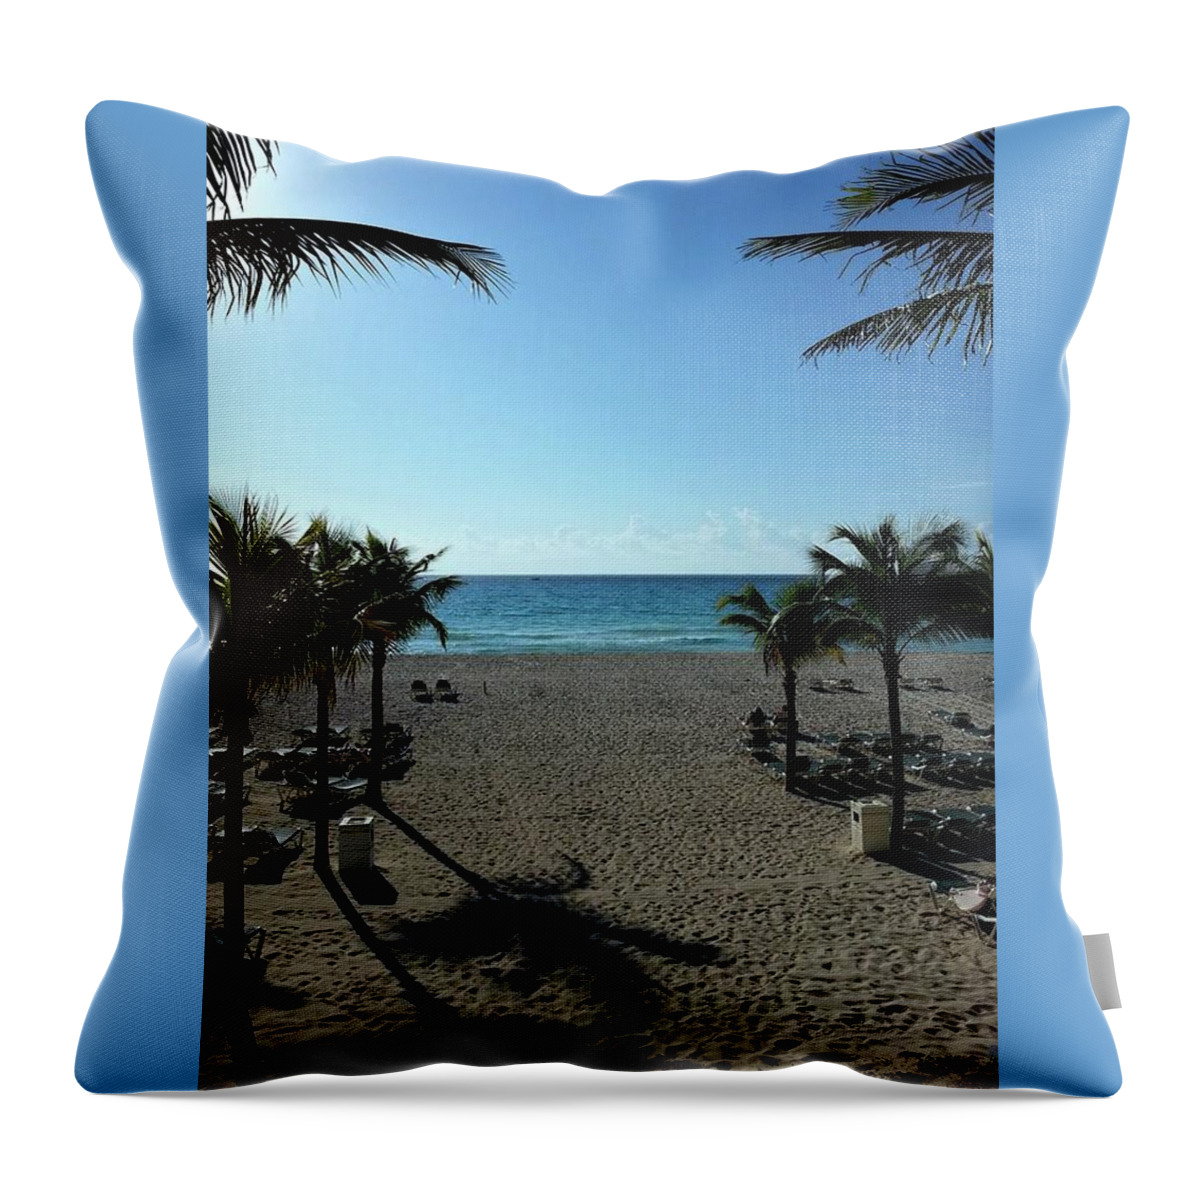 Mexico Throw Pillow featuring the photograph Quintana Roo by Fred Larucci